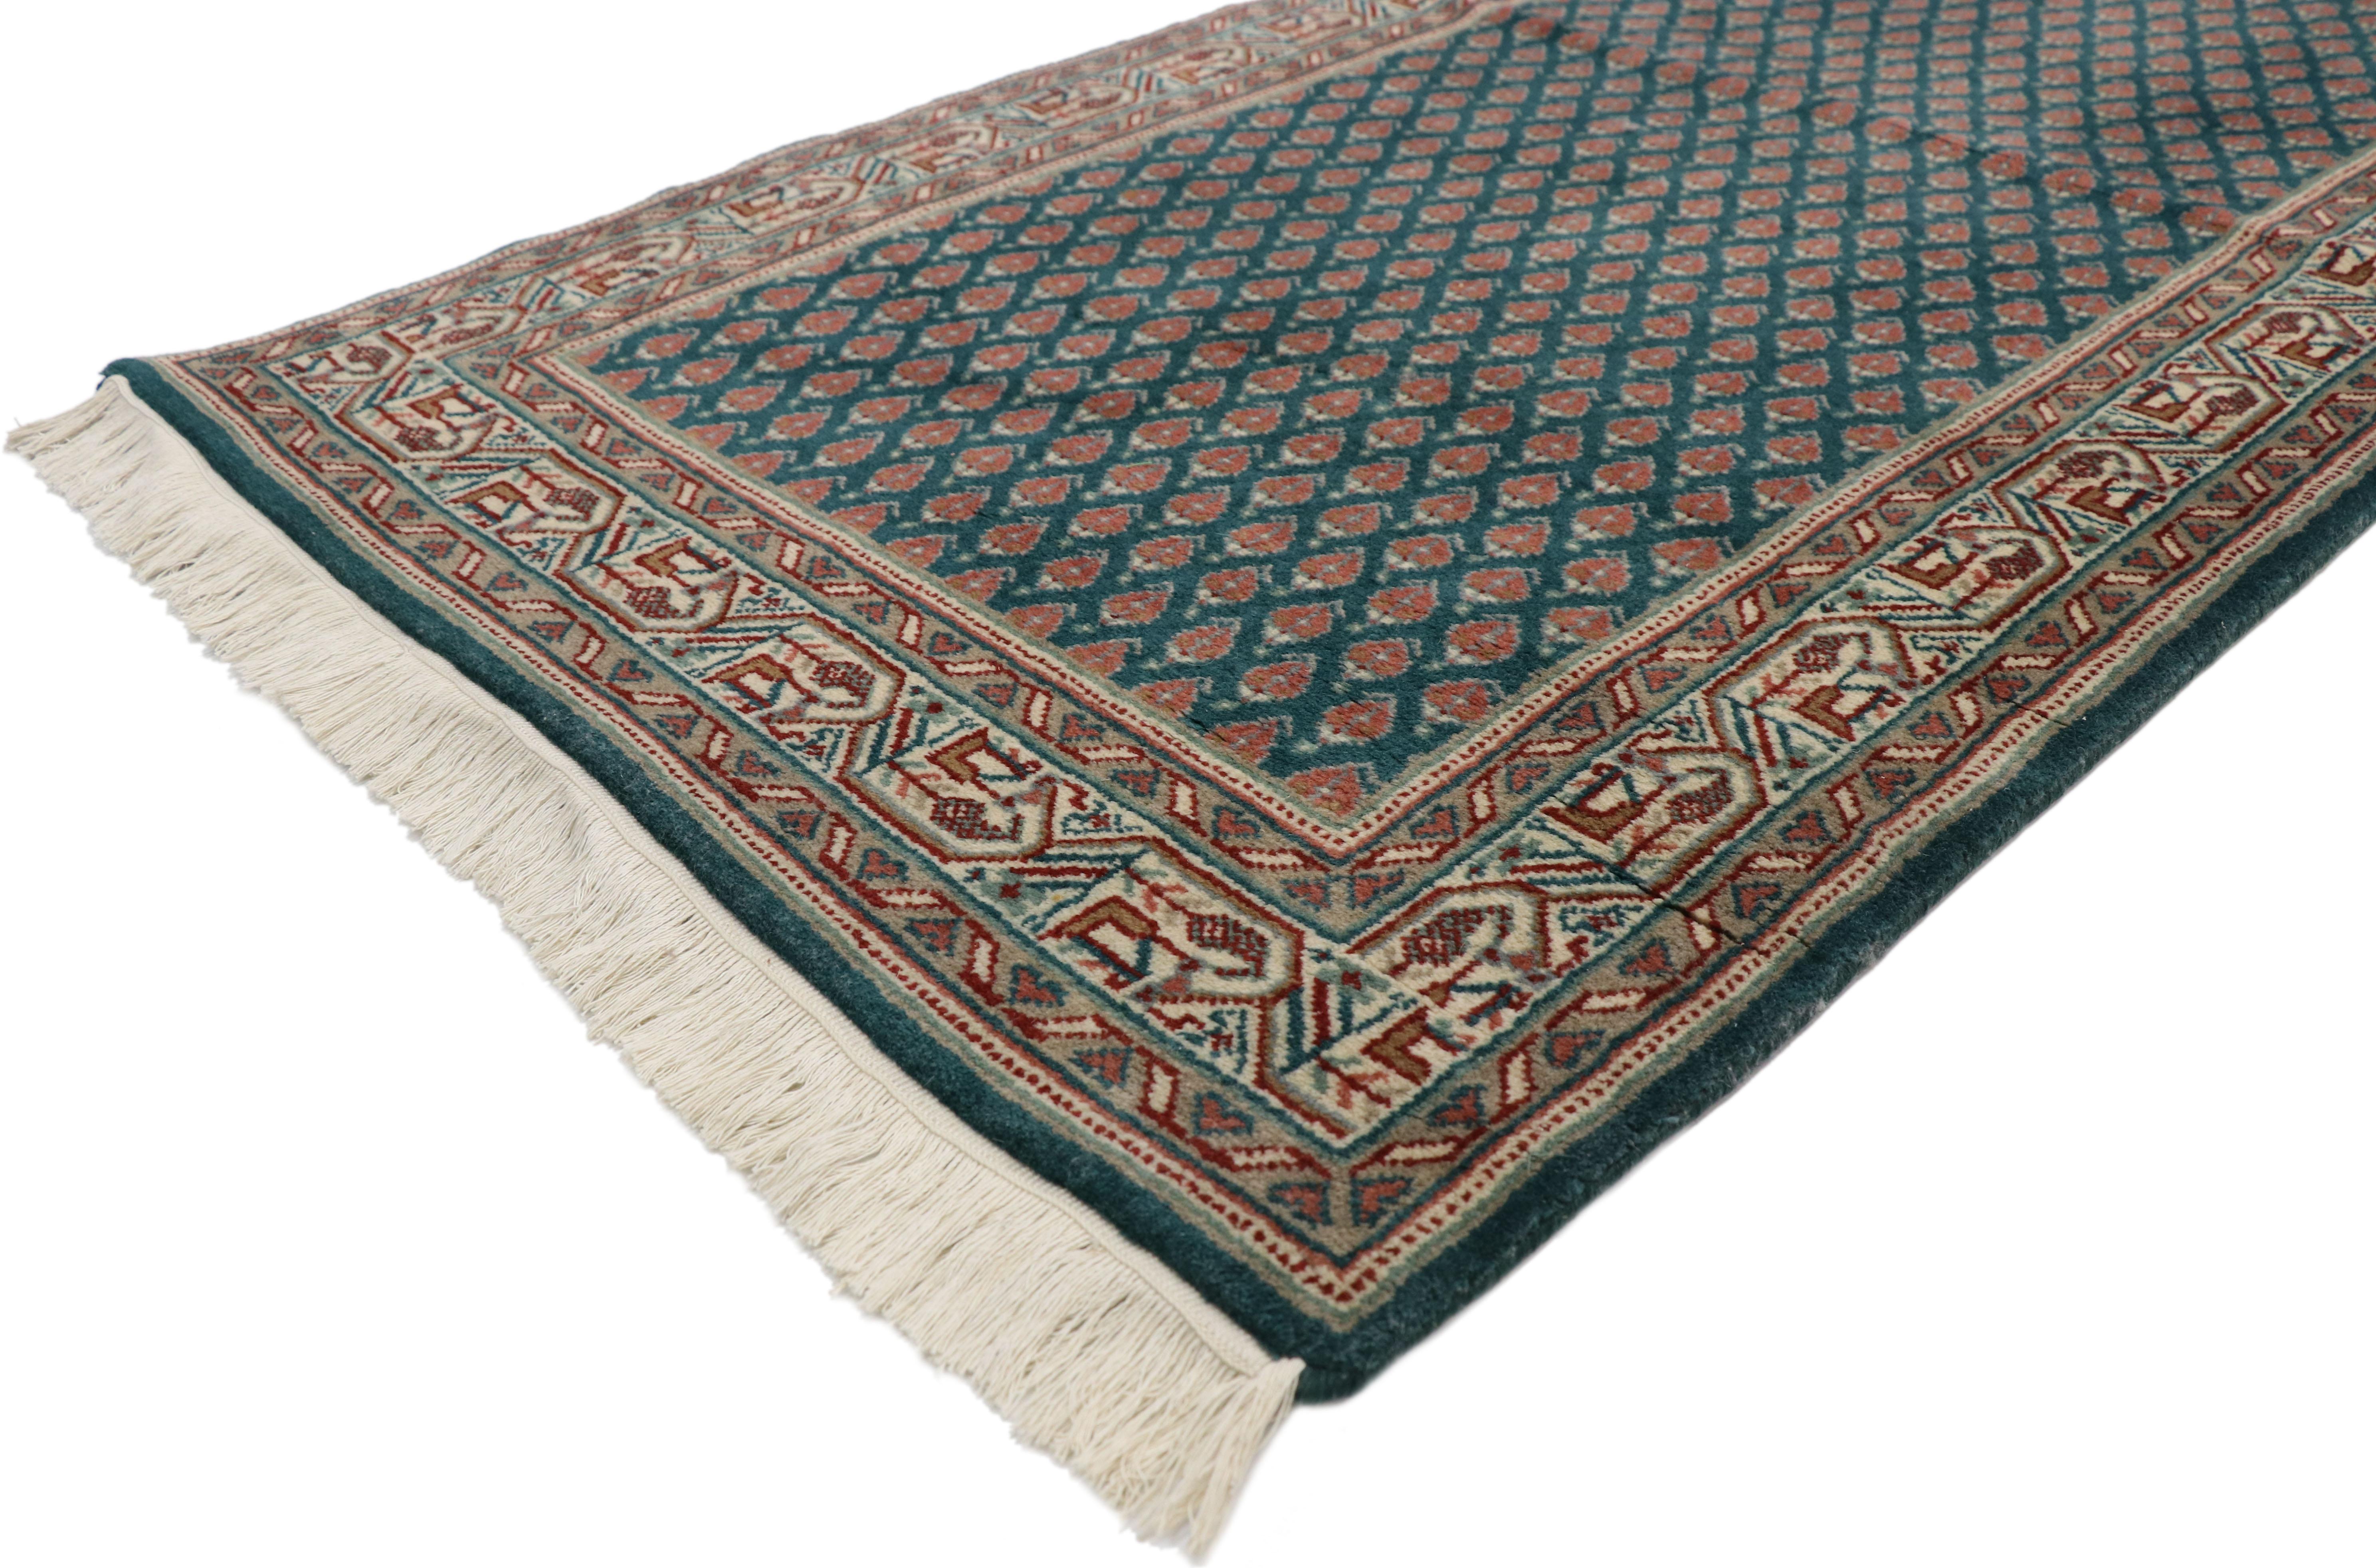 72083, vintage Indian runner with Old World Victorian style. This hand knotted wool vintage Indian runner displays an all-over repetitive pattern of opulent boteh motifs. The widely used boteh motif is thought to symbolize life with its resemblance